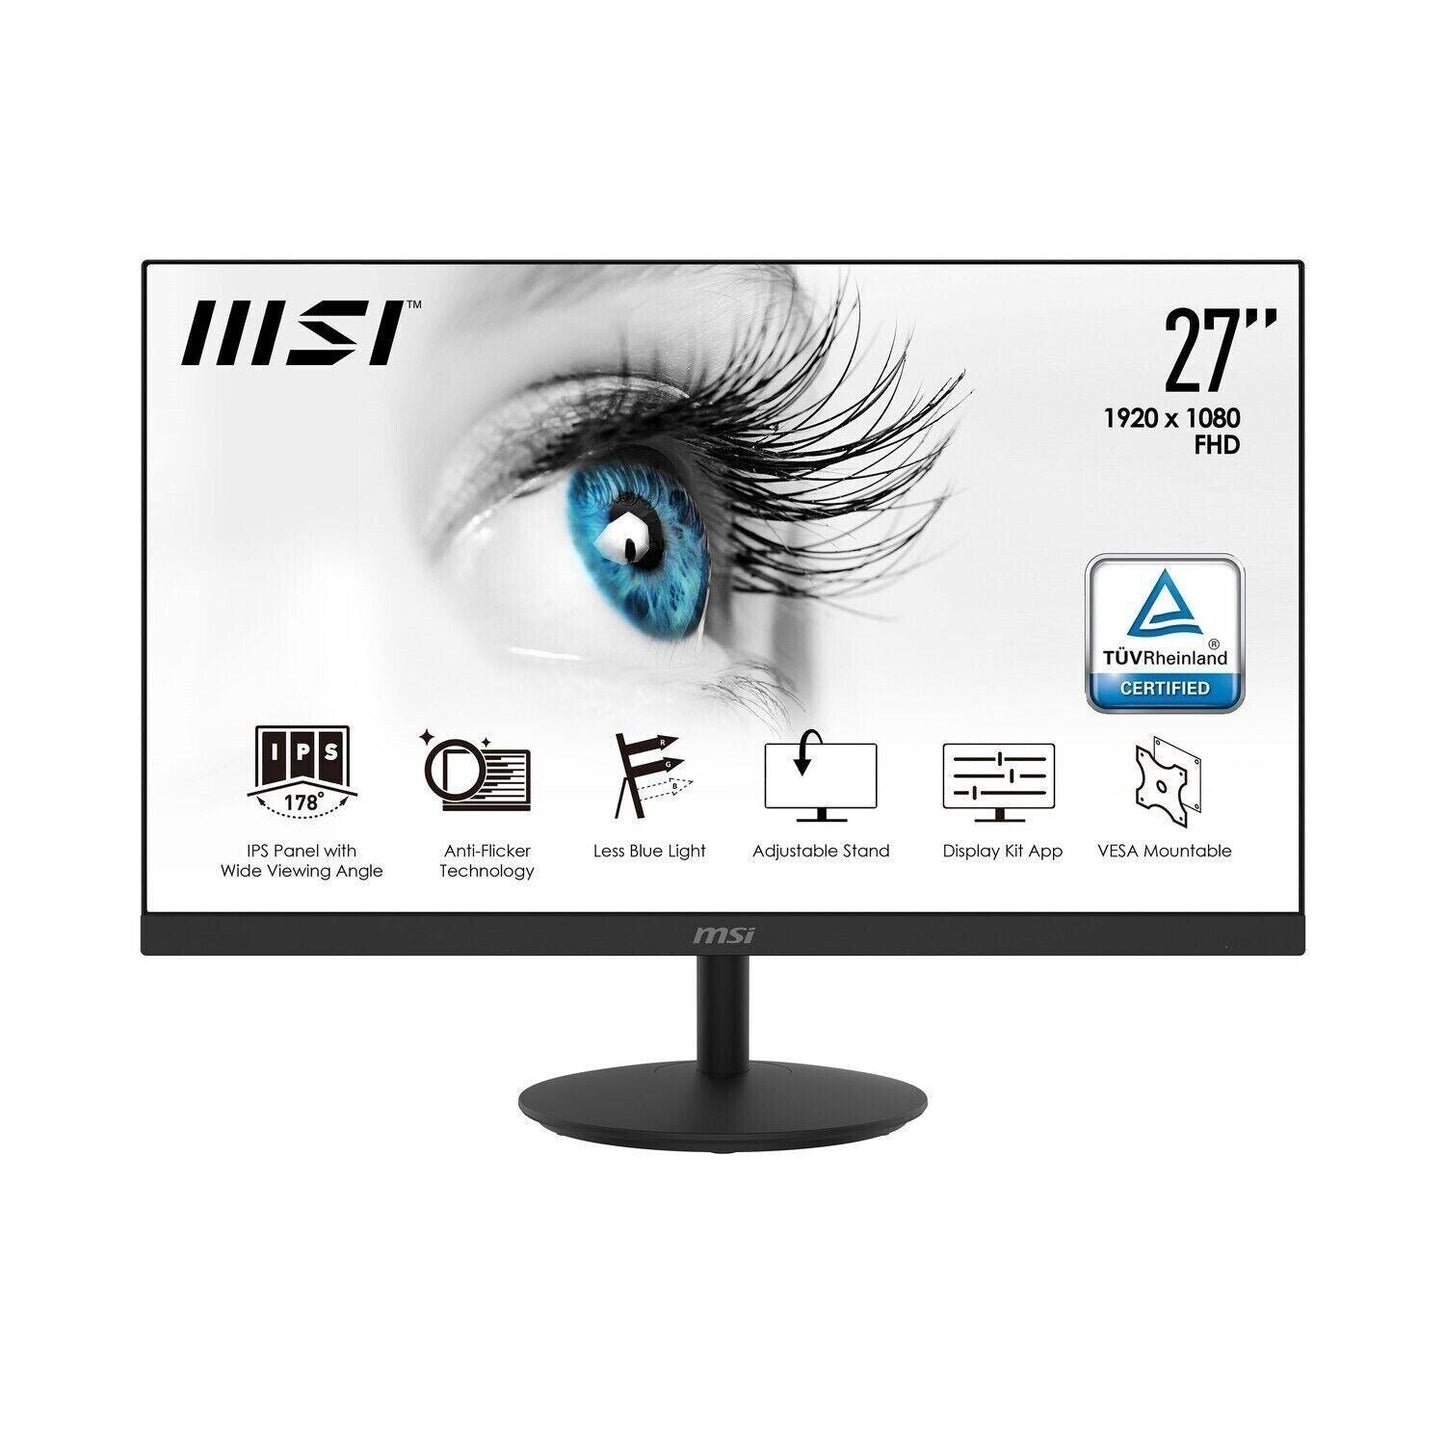 MSI PRO MP271 27" IPS Full HD Gaming Monitor U NO STAND - Smart Clear Vision